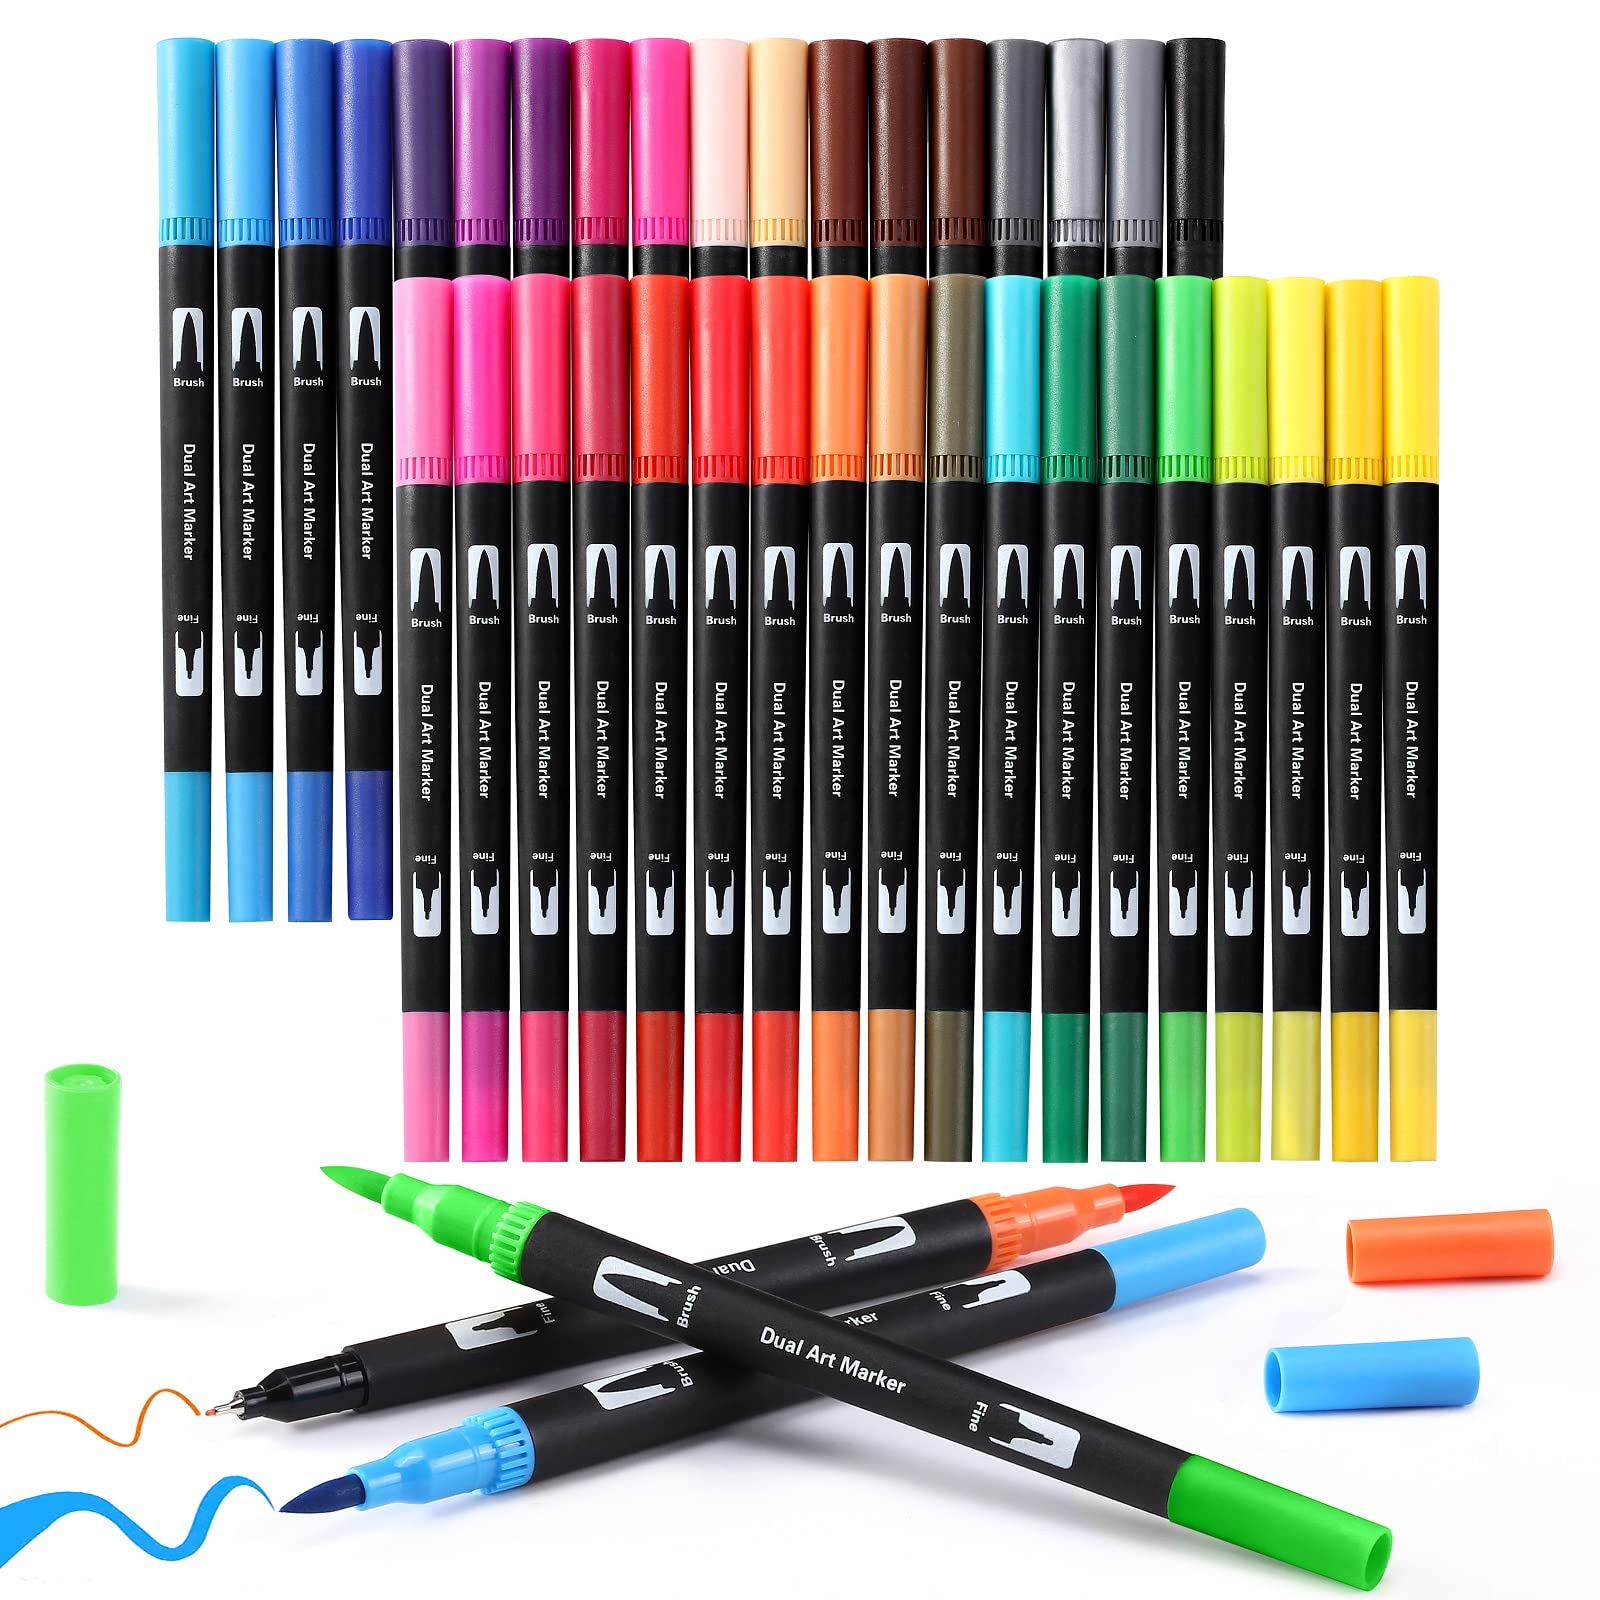 upanic Upanic Brush Markers for Adults Coloring,36 Colors Art Markers Colored  Pens for Bullet Journaling Note Taking Drawing Calligraph